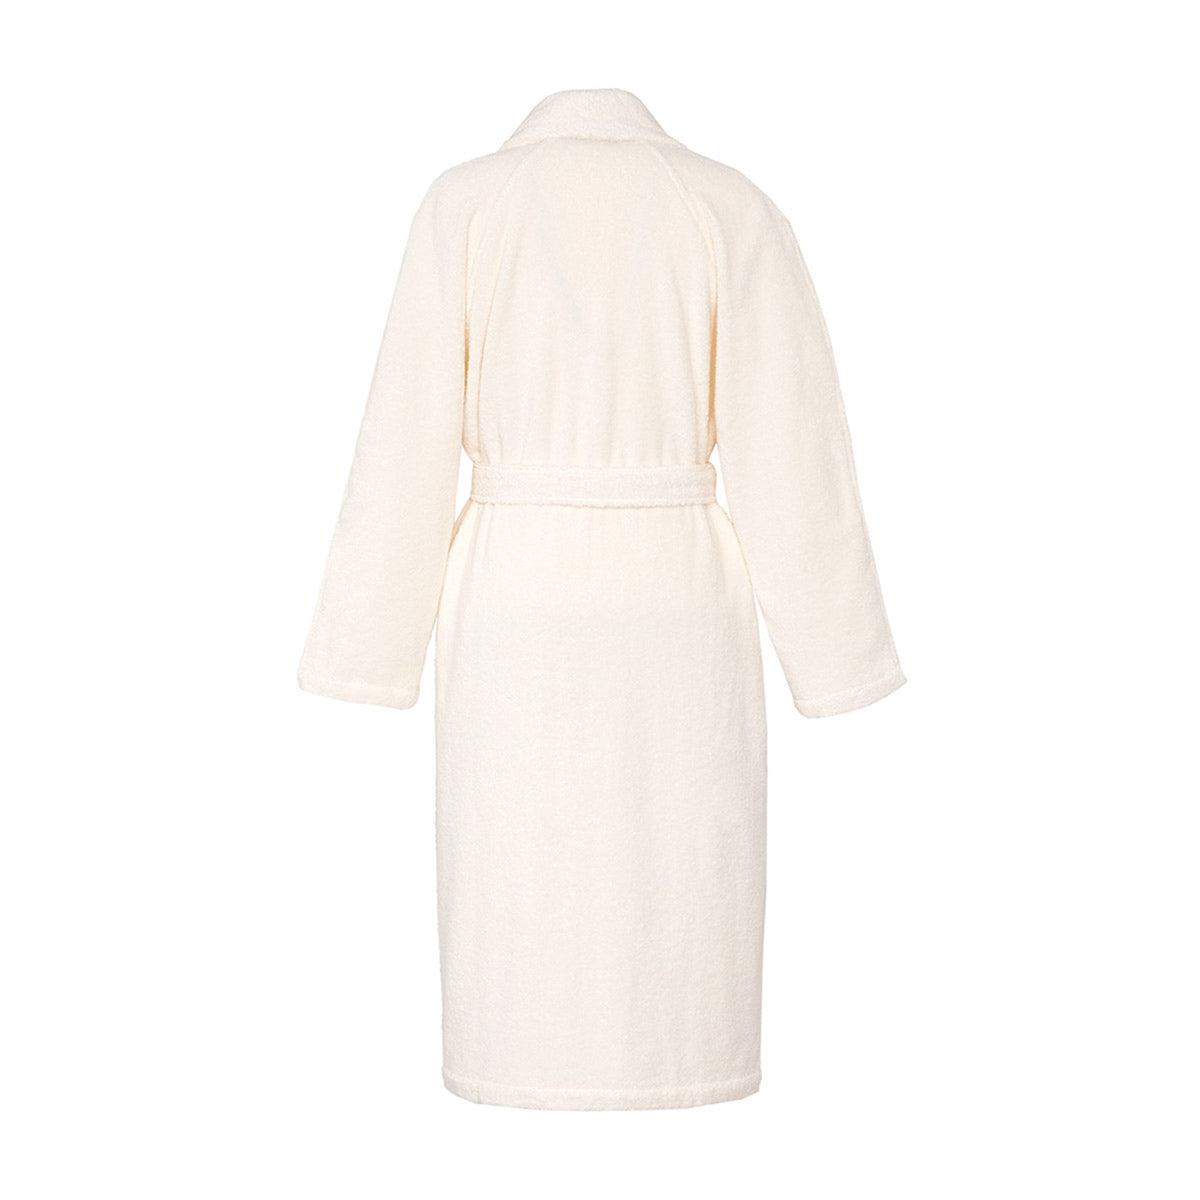 Back View of Yves Delorme Etoile Bath Robe in Color Nacre